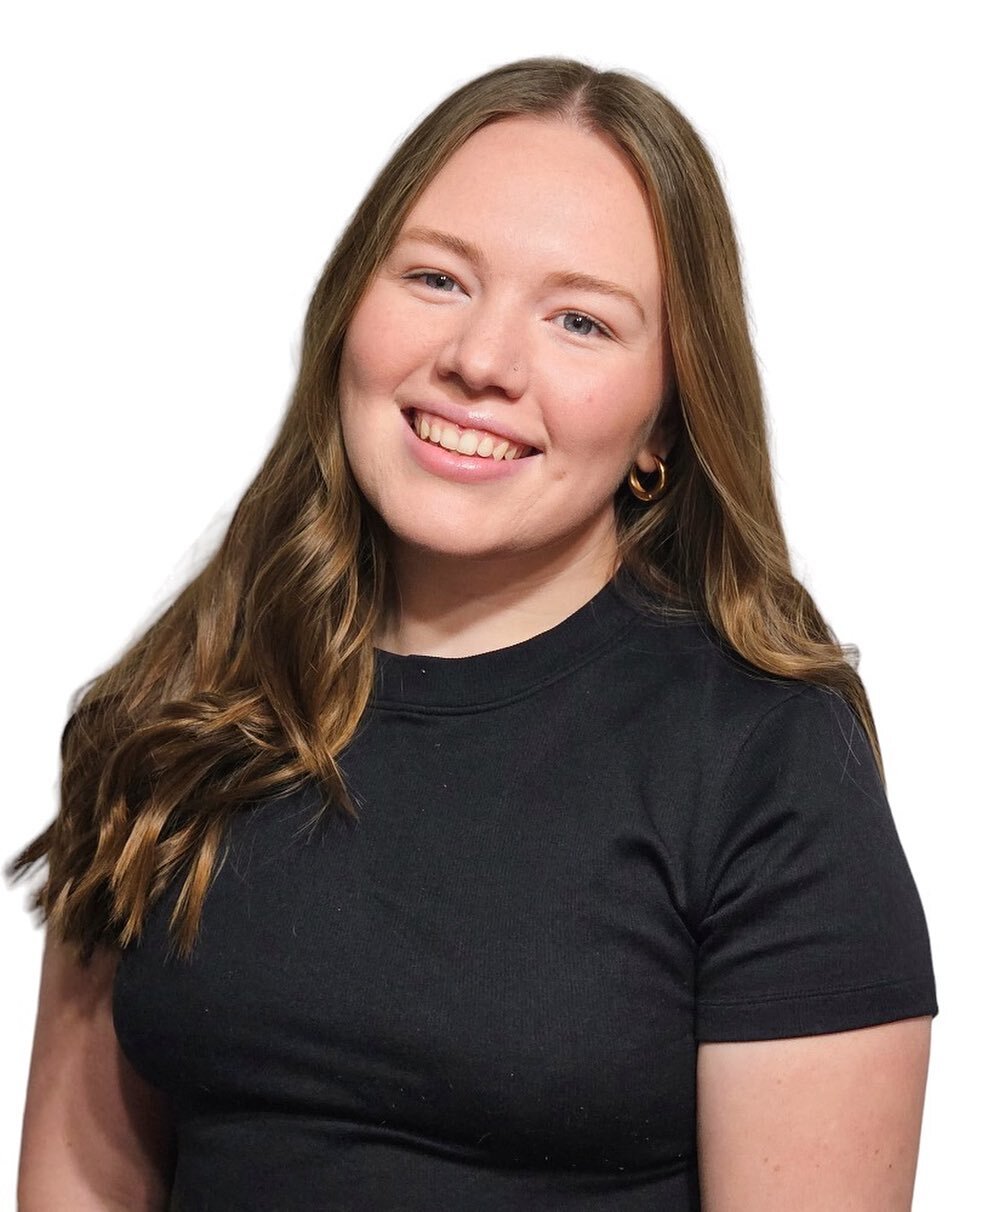 Kayleigh is a Registered Massage Therapist who graduated from Humber College with honours. During her studies, she participated in numerous internships providing massage to populations in pre/post-partum care, palliative care, addiction and withdrawa